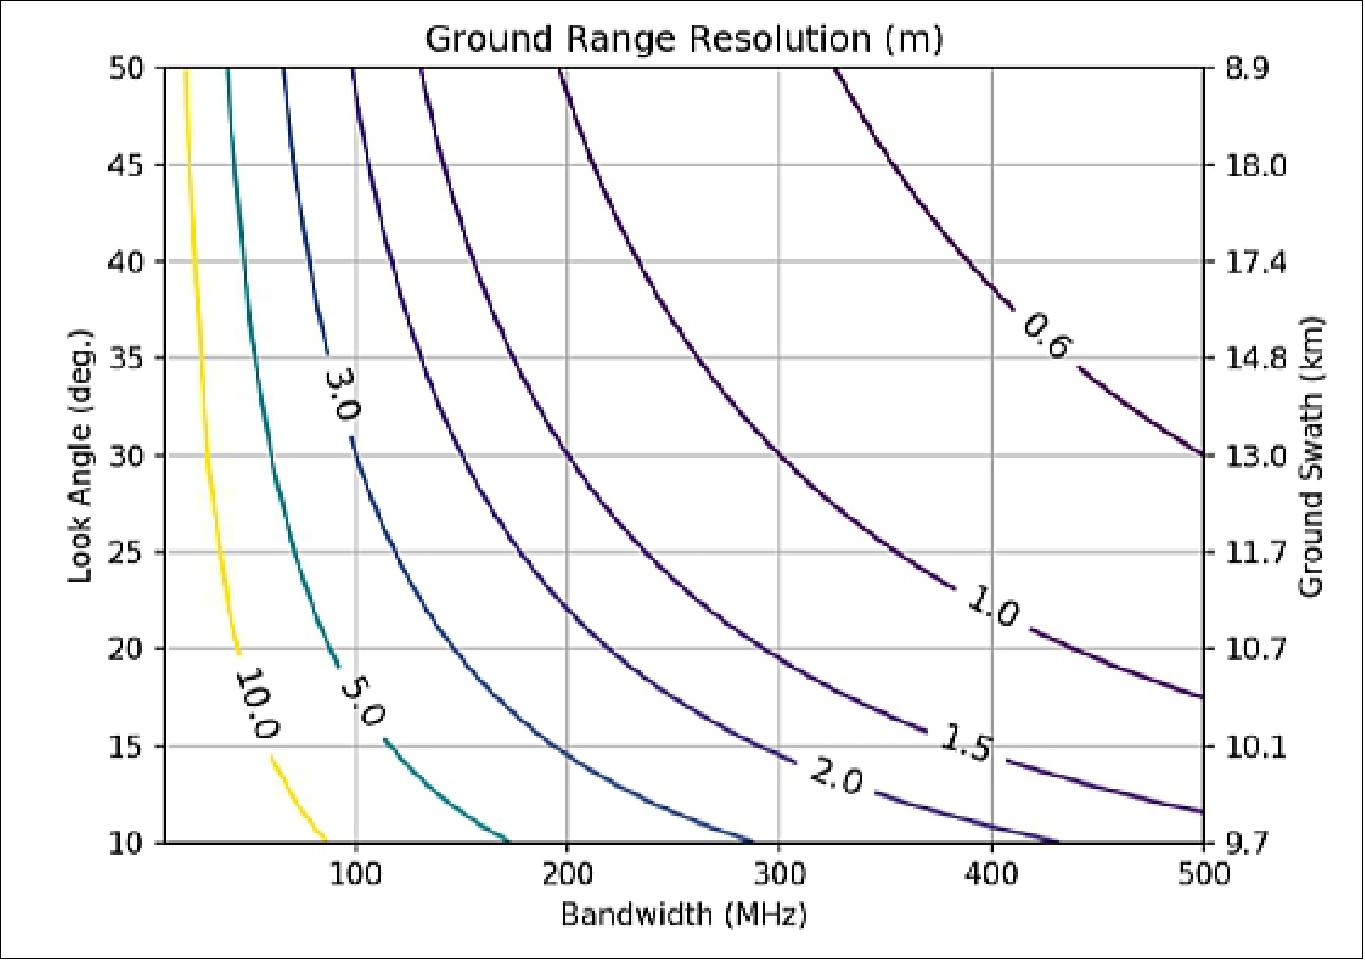 Figure 2: Ground range resolution plotted as a function of transmit bandwidth and look angle (image credit: Capella Space)